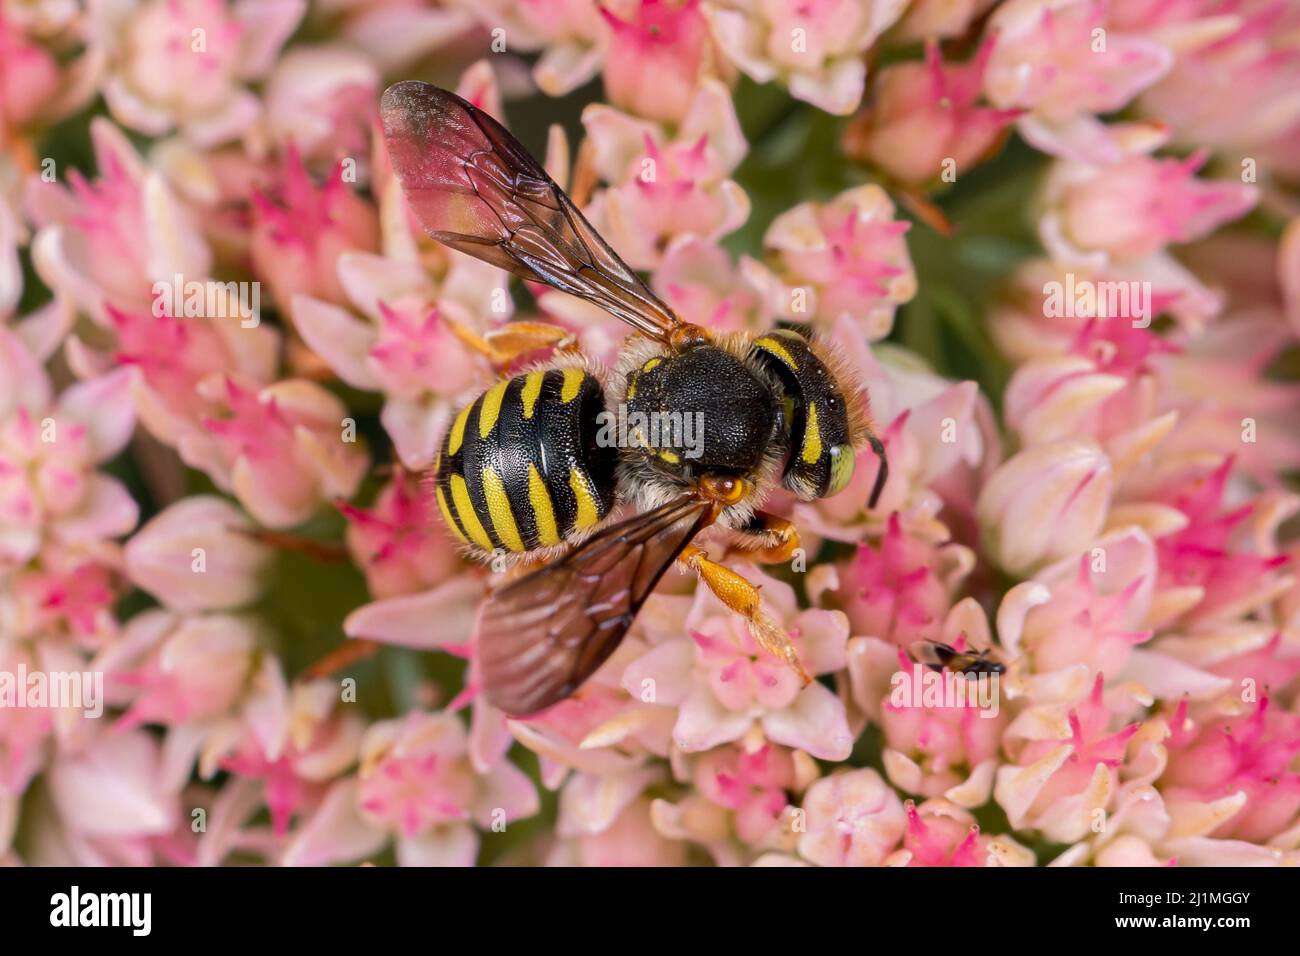 Wool-Carder bee feeding on nectar from Sedum plant. Insect and wildlife conservation, habitat preservation, and backyard flower garden concept Stock Photo